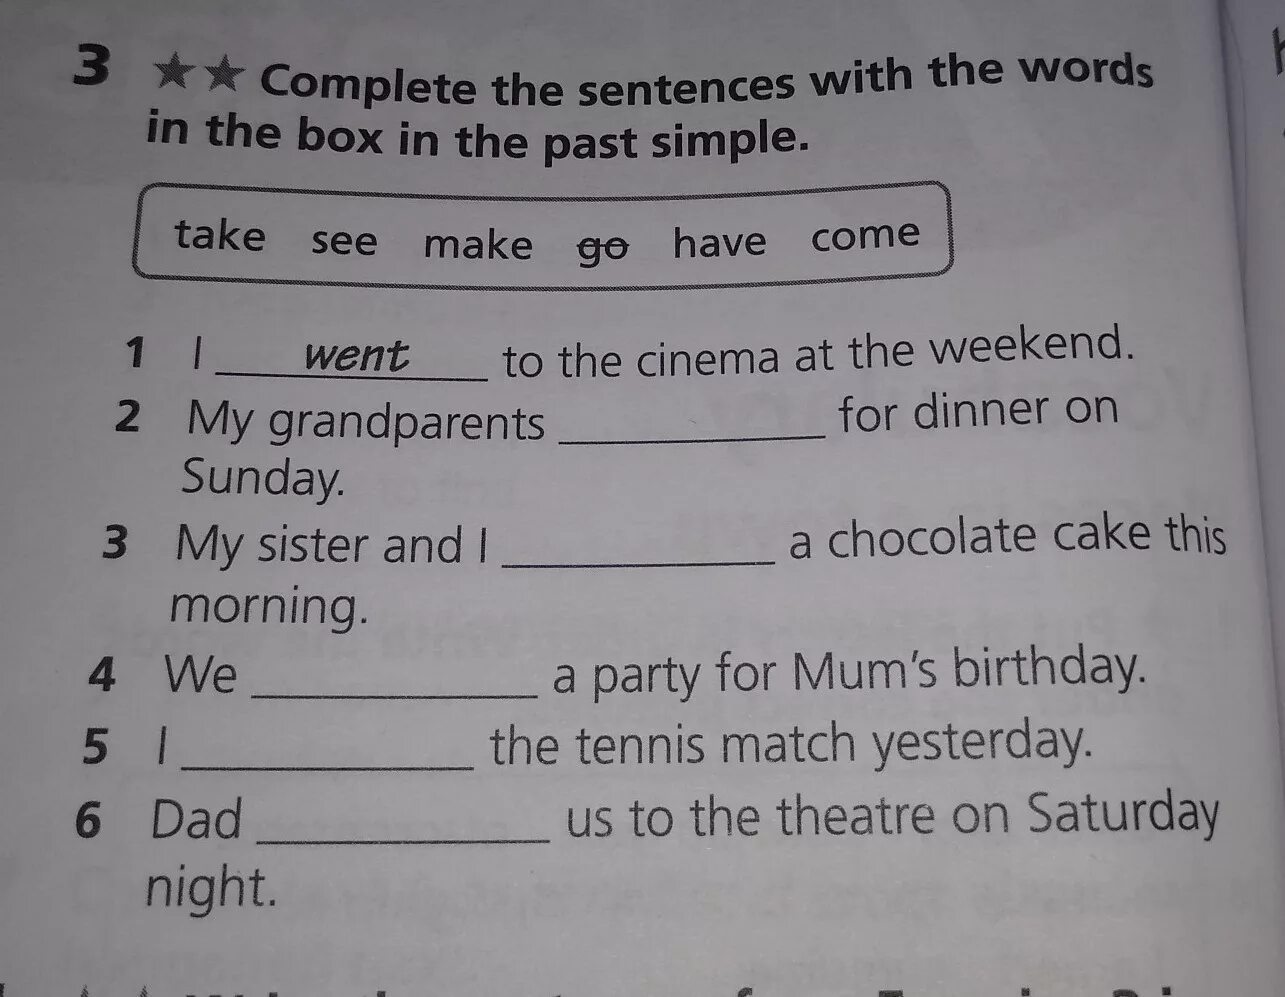 Complete the sentences with the. Complete the sentences with the Words in the Box. Complete the sentences with the Words. Complete the Words in the sentences. Complete the sentences with wish